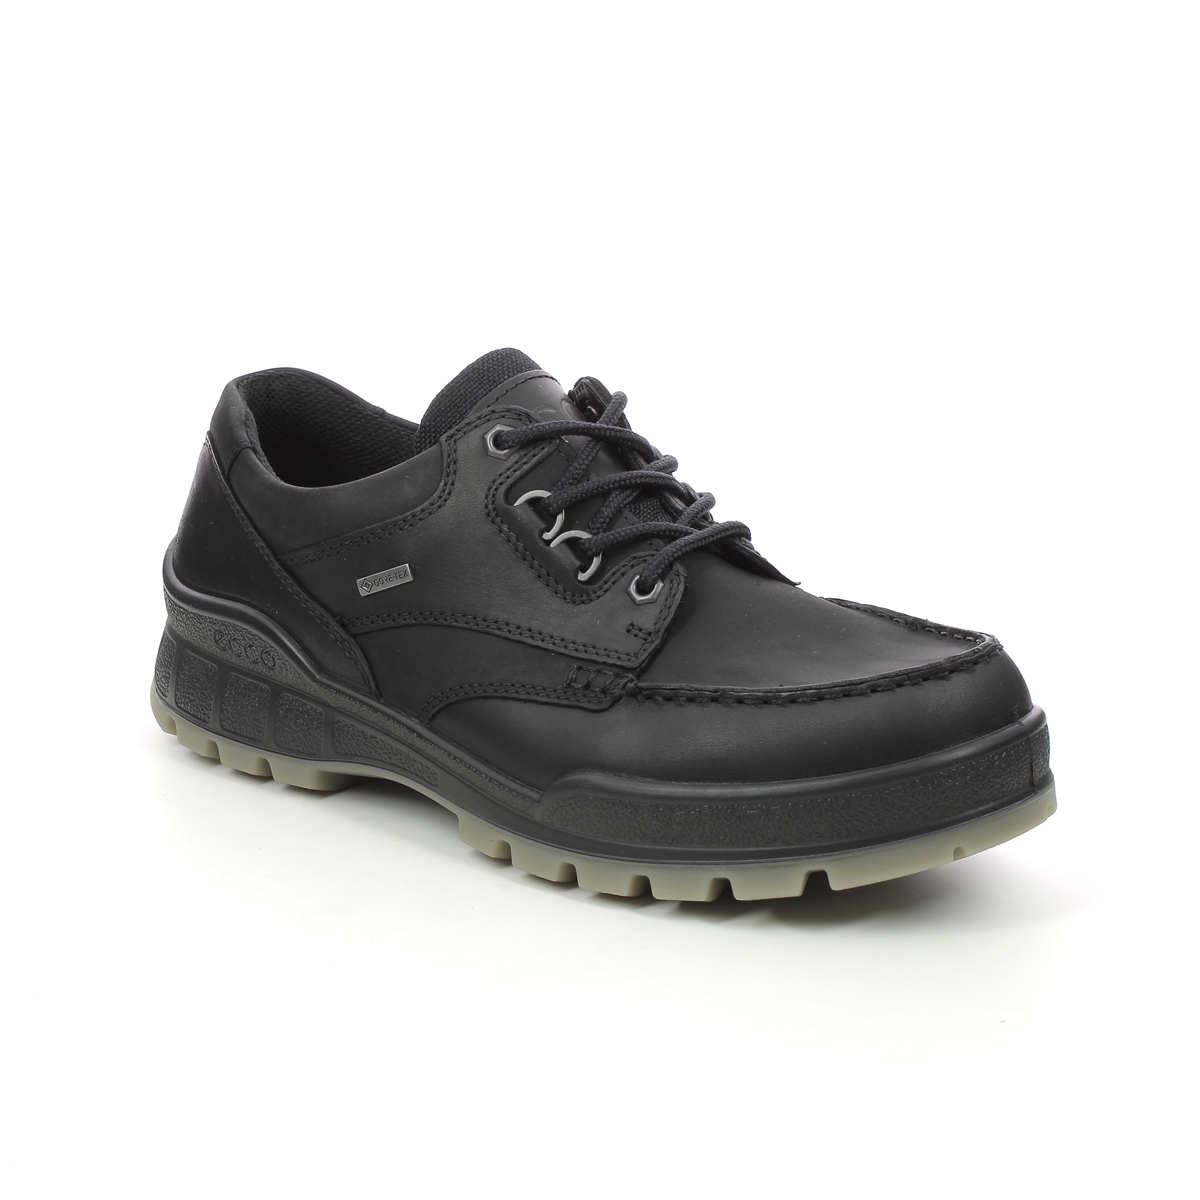 Ecco Track 25 Gore Black Leather Mens Walking Shoes 831714-51052 In Size 46 In Plain Black Leather